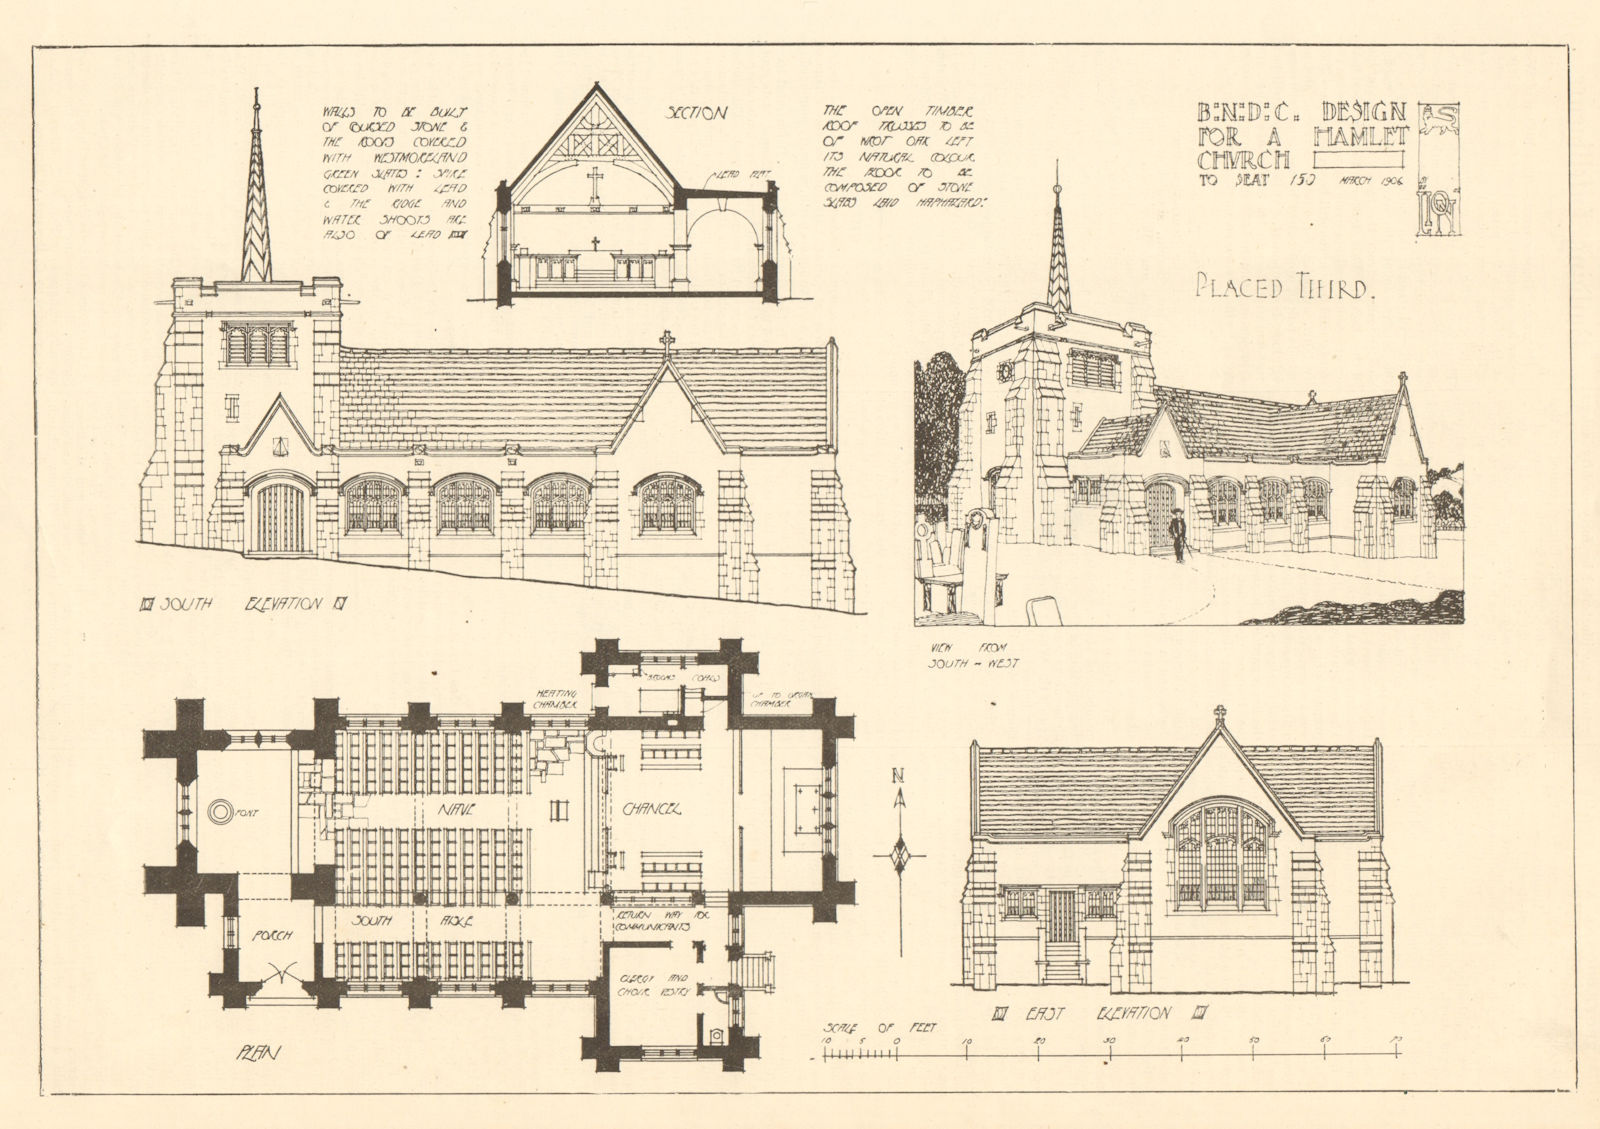 Design for a Hamlet Church to seat 150. Elevations, plans & view 1907 print